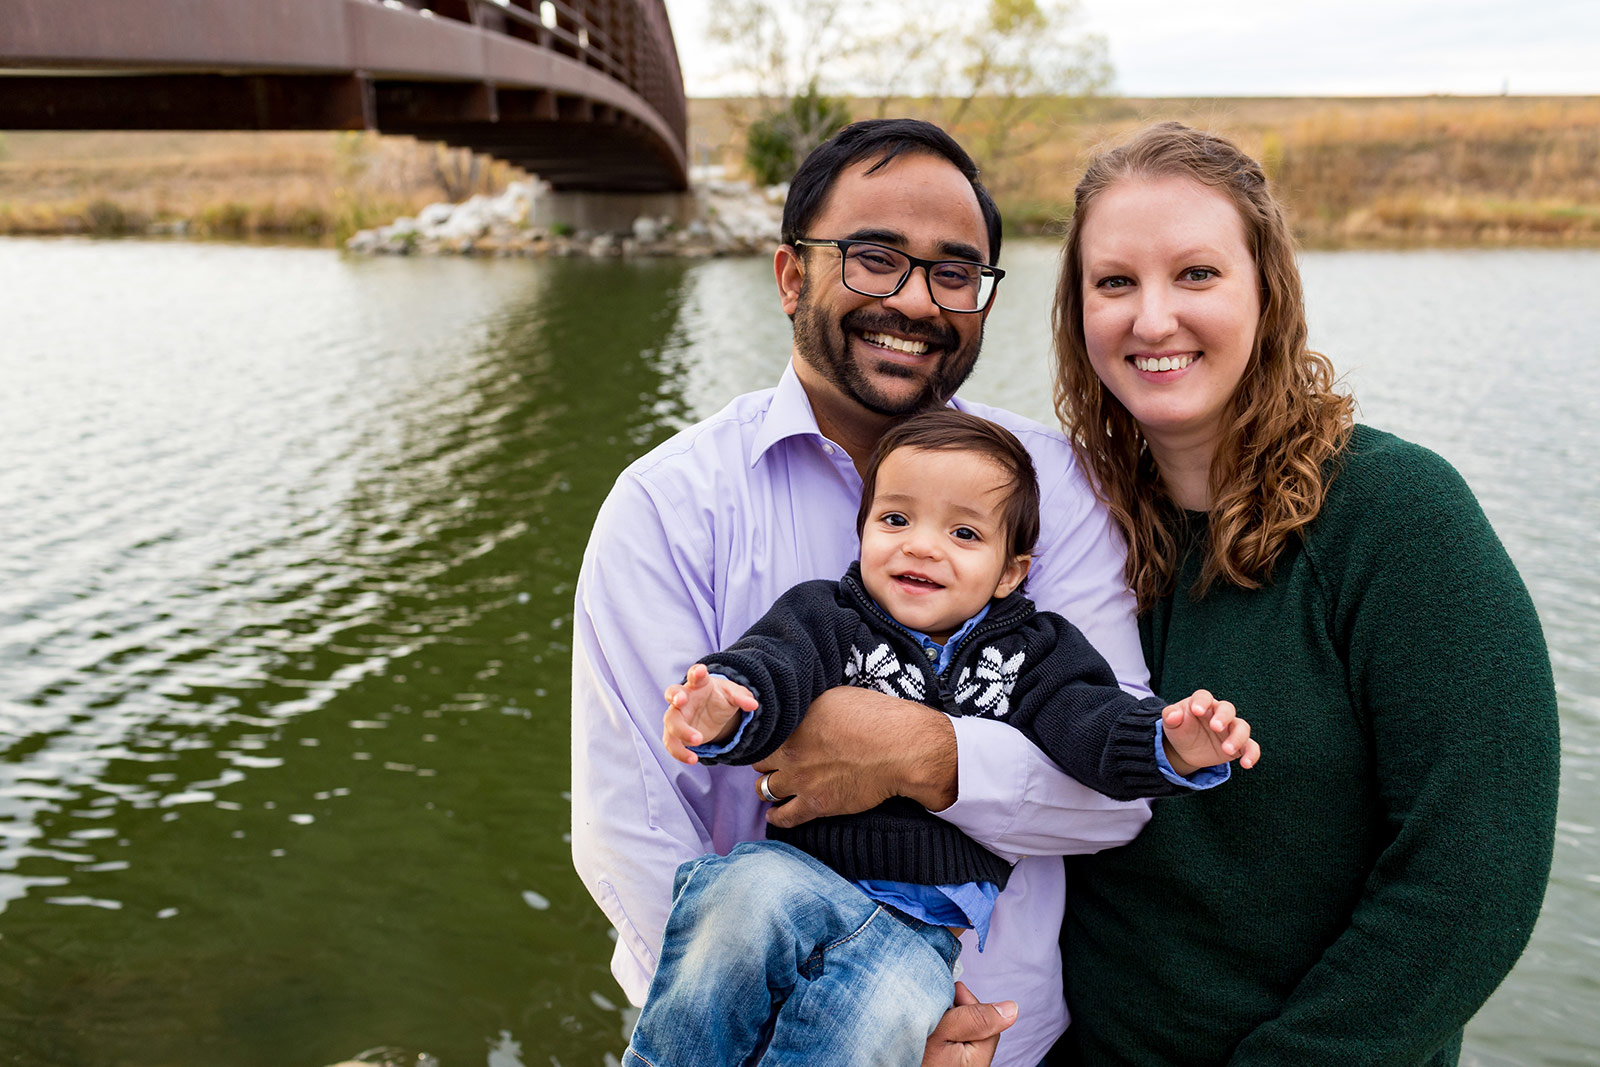 The family smiles naturally for a portrait in front of a lake and bridge.